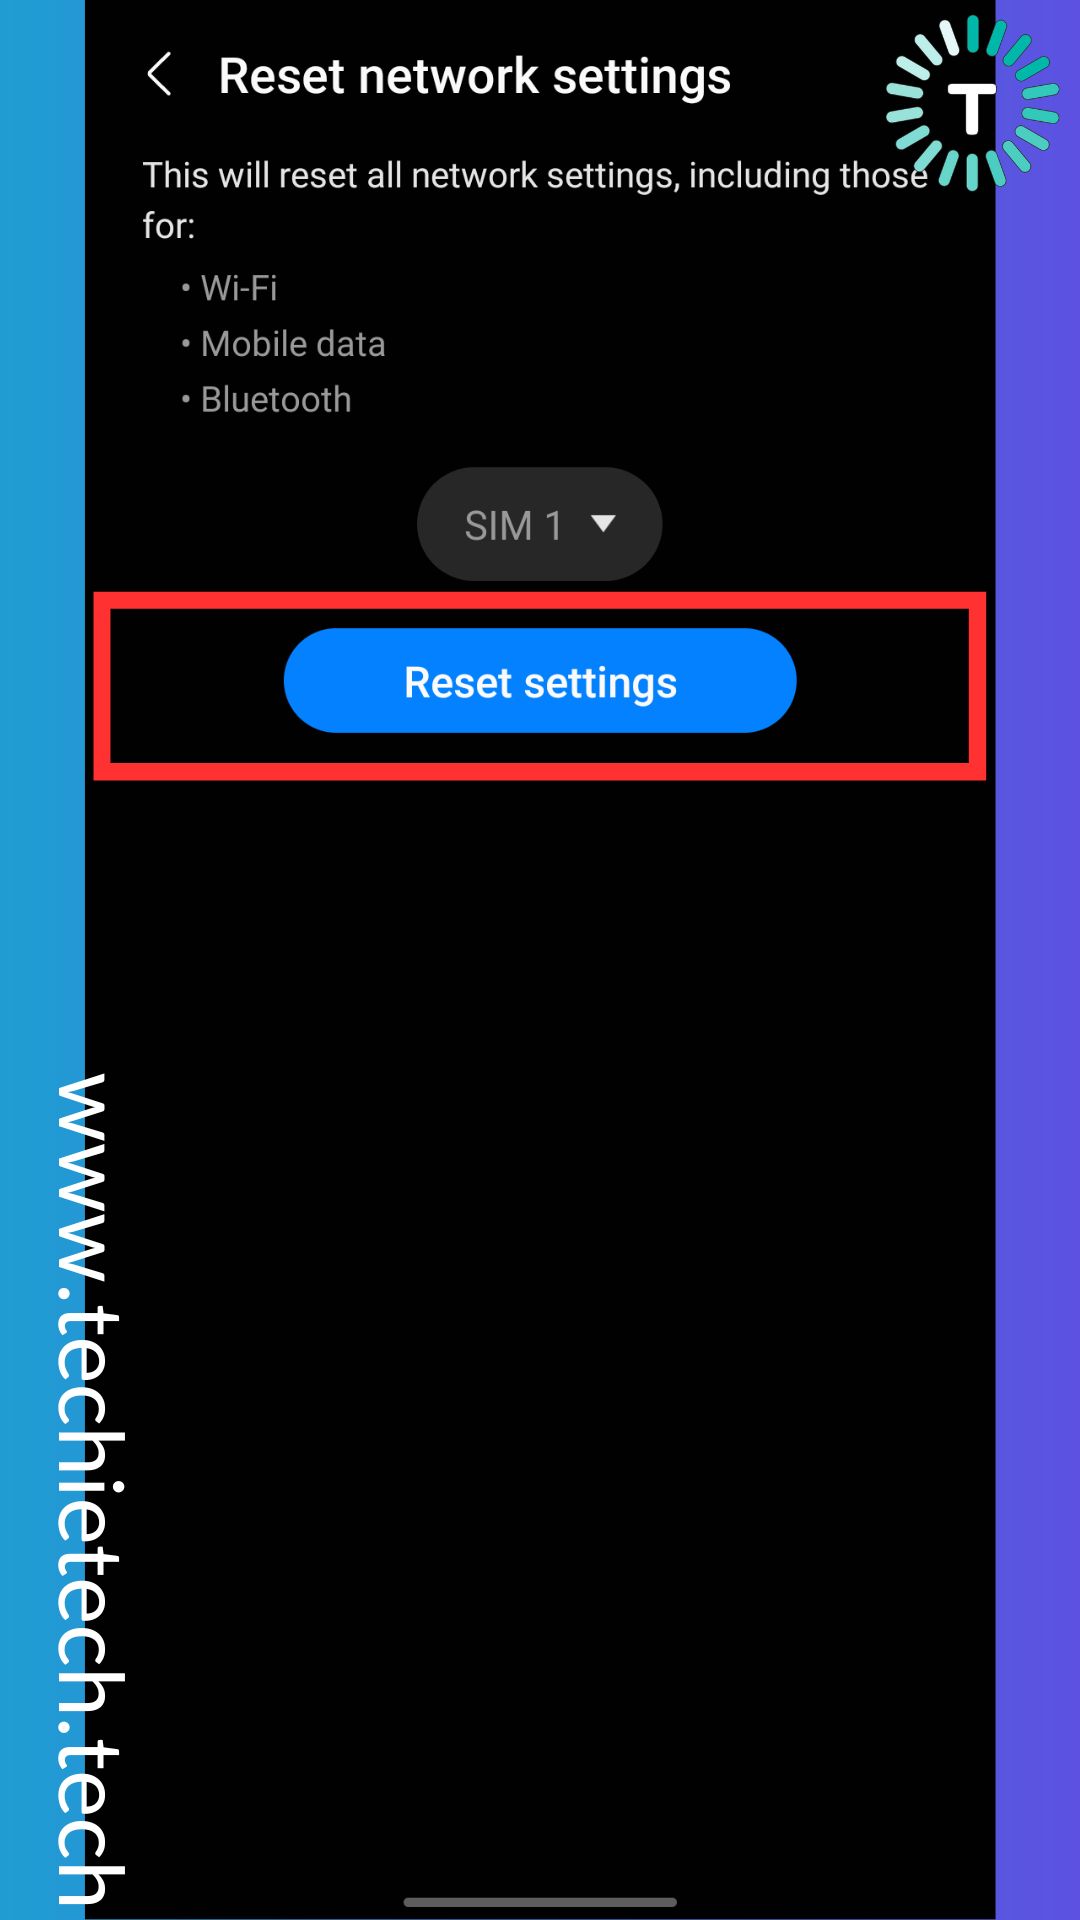 On the next screen, for SIM 1, tap on Reset settings